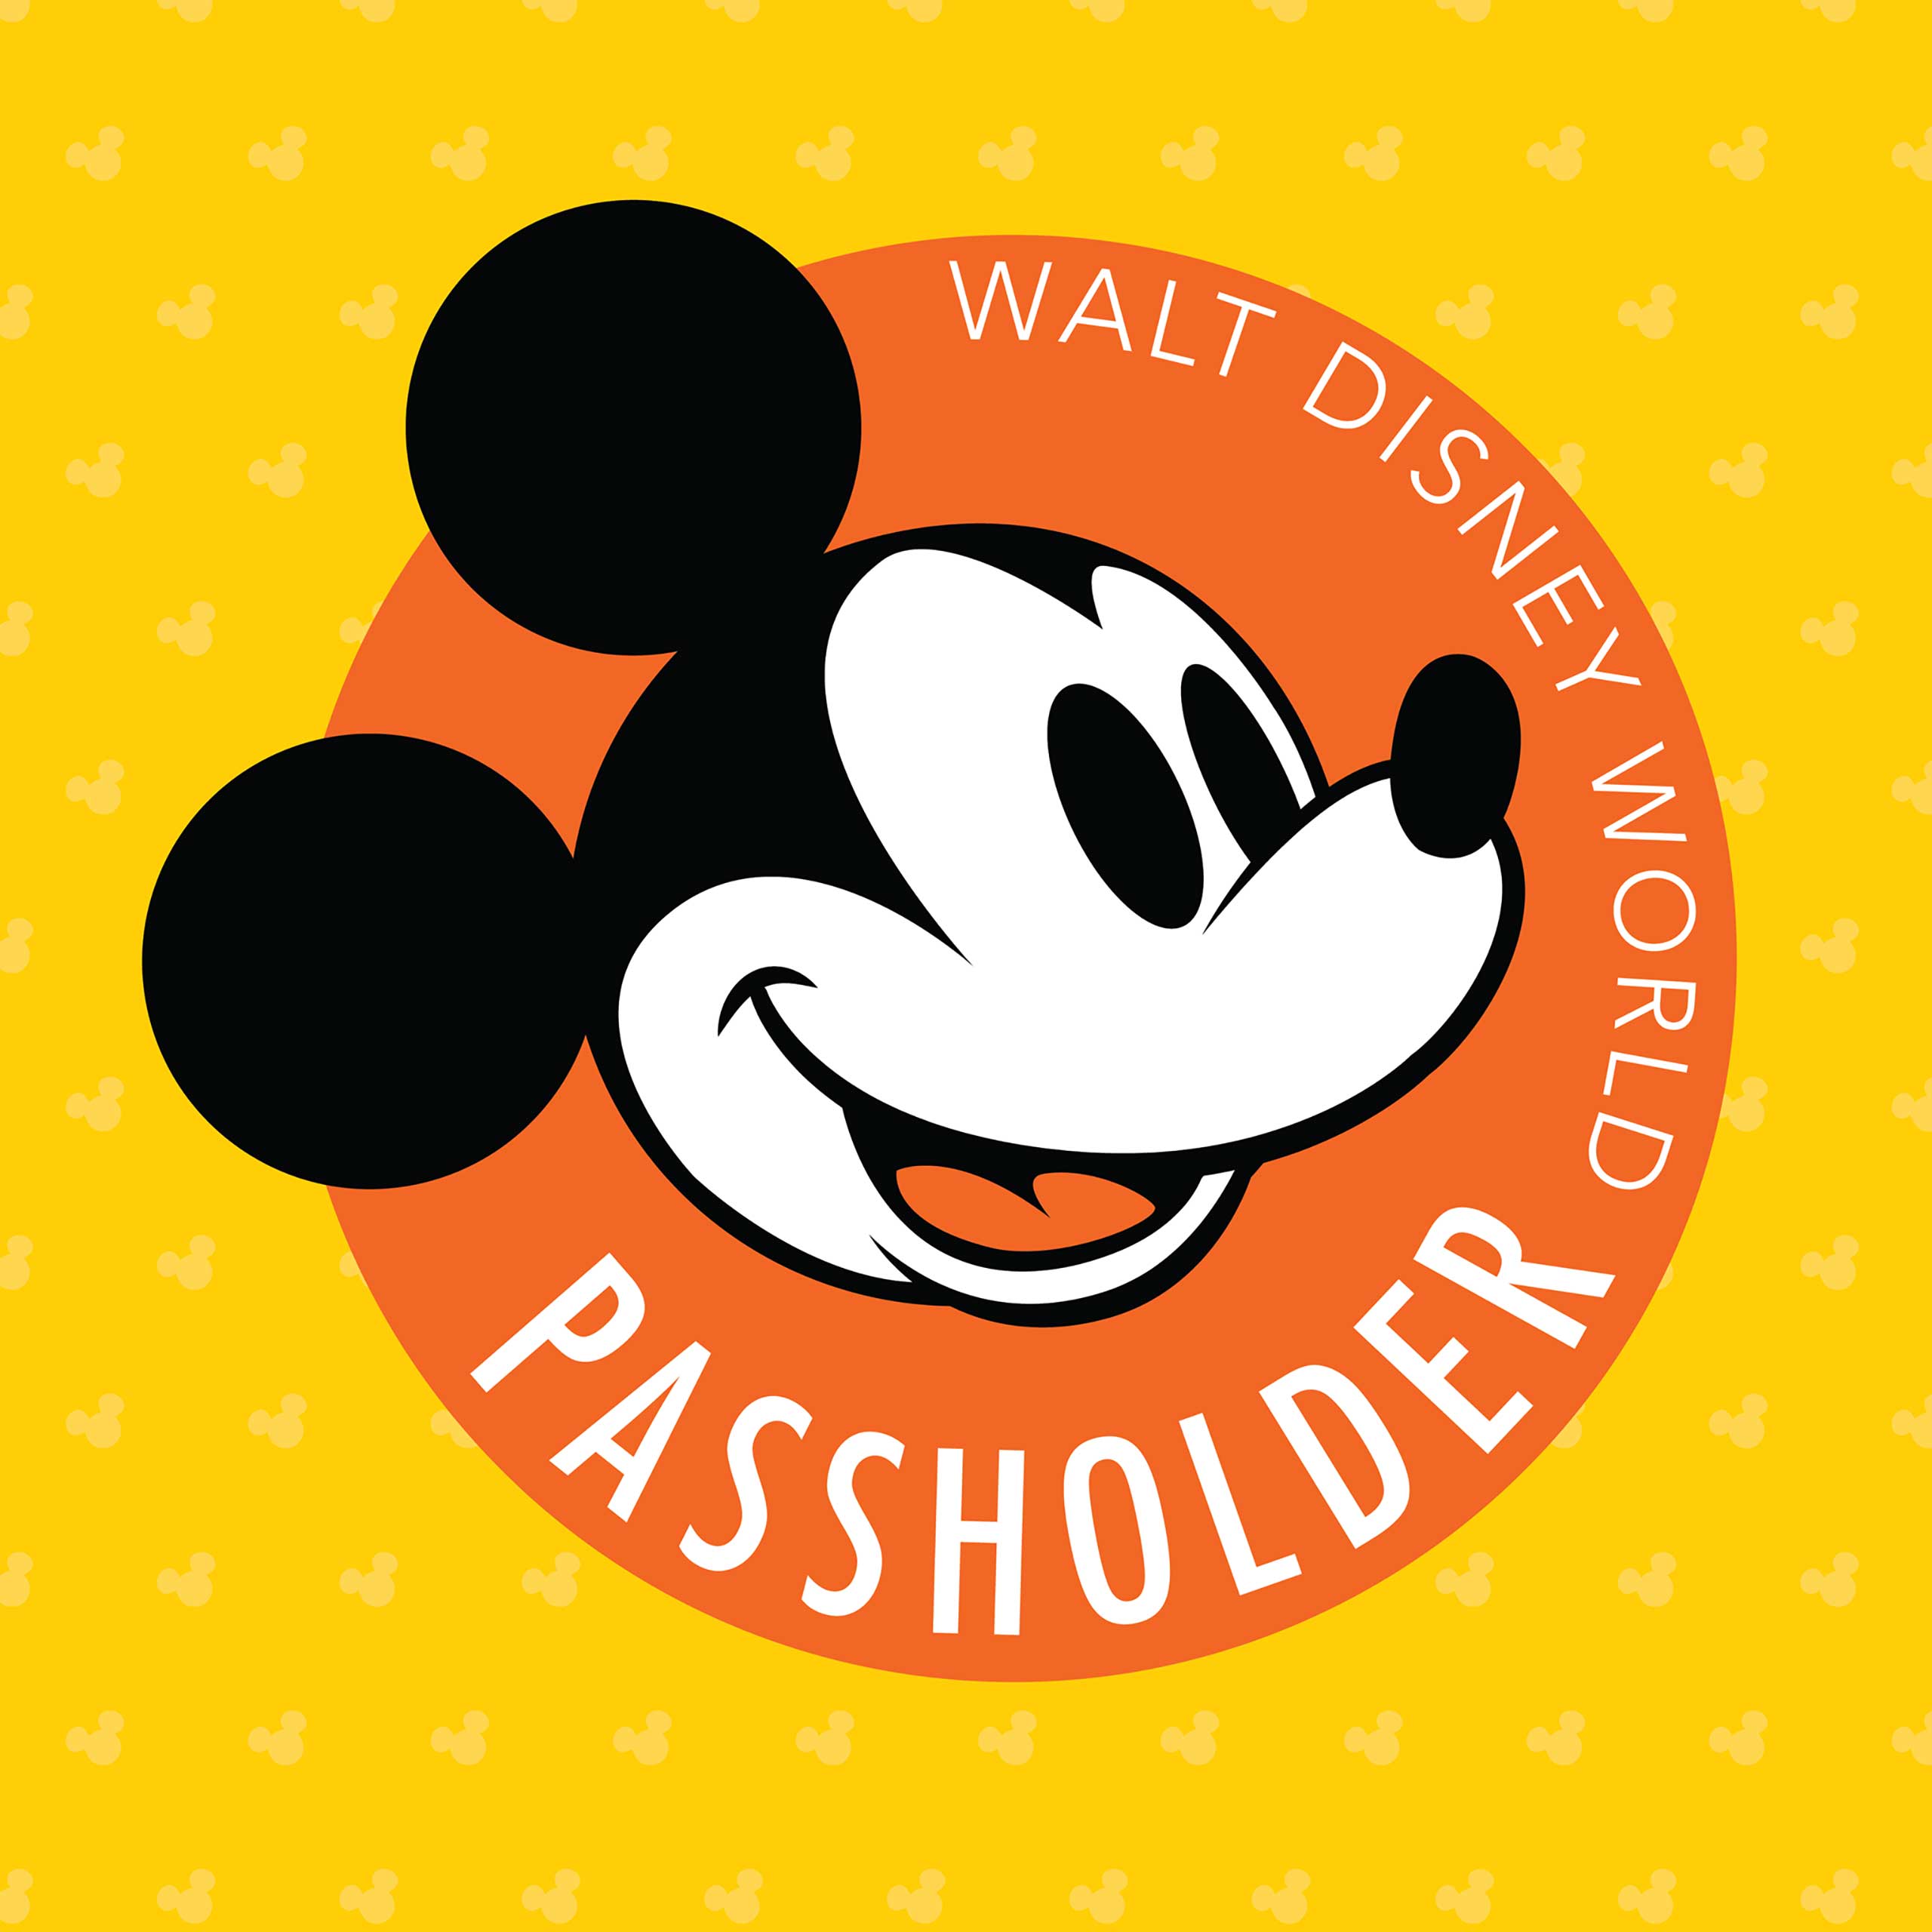 Annual Passholder pop-up shop coming to EPCOT’s Germany pavilion